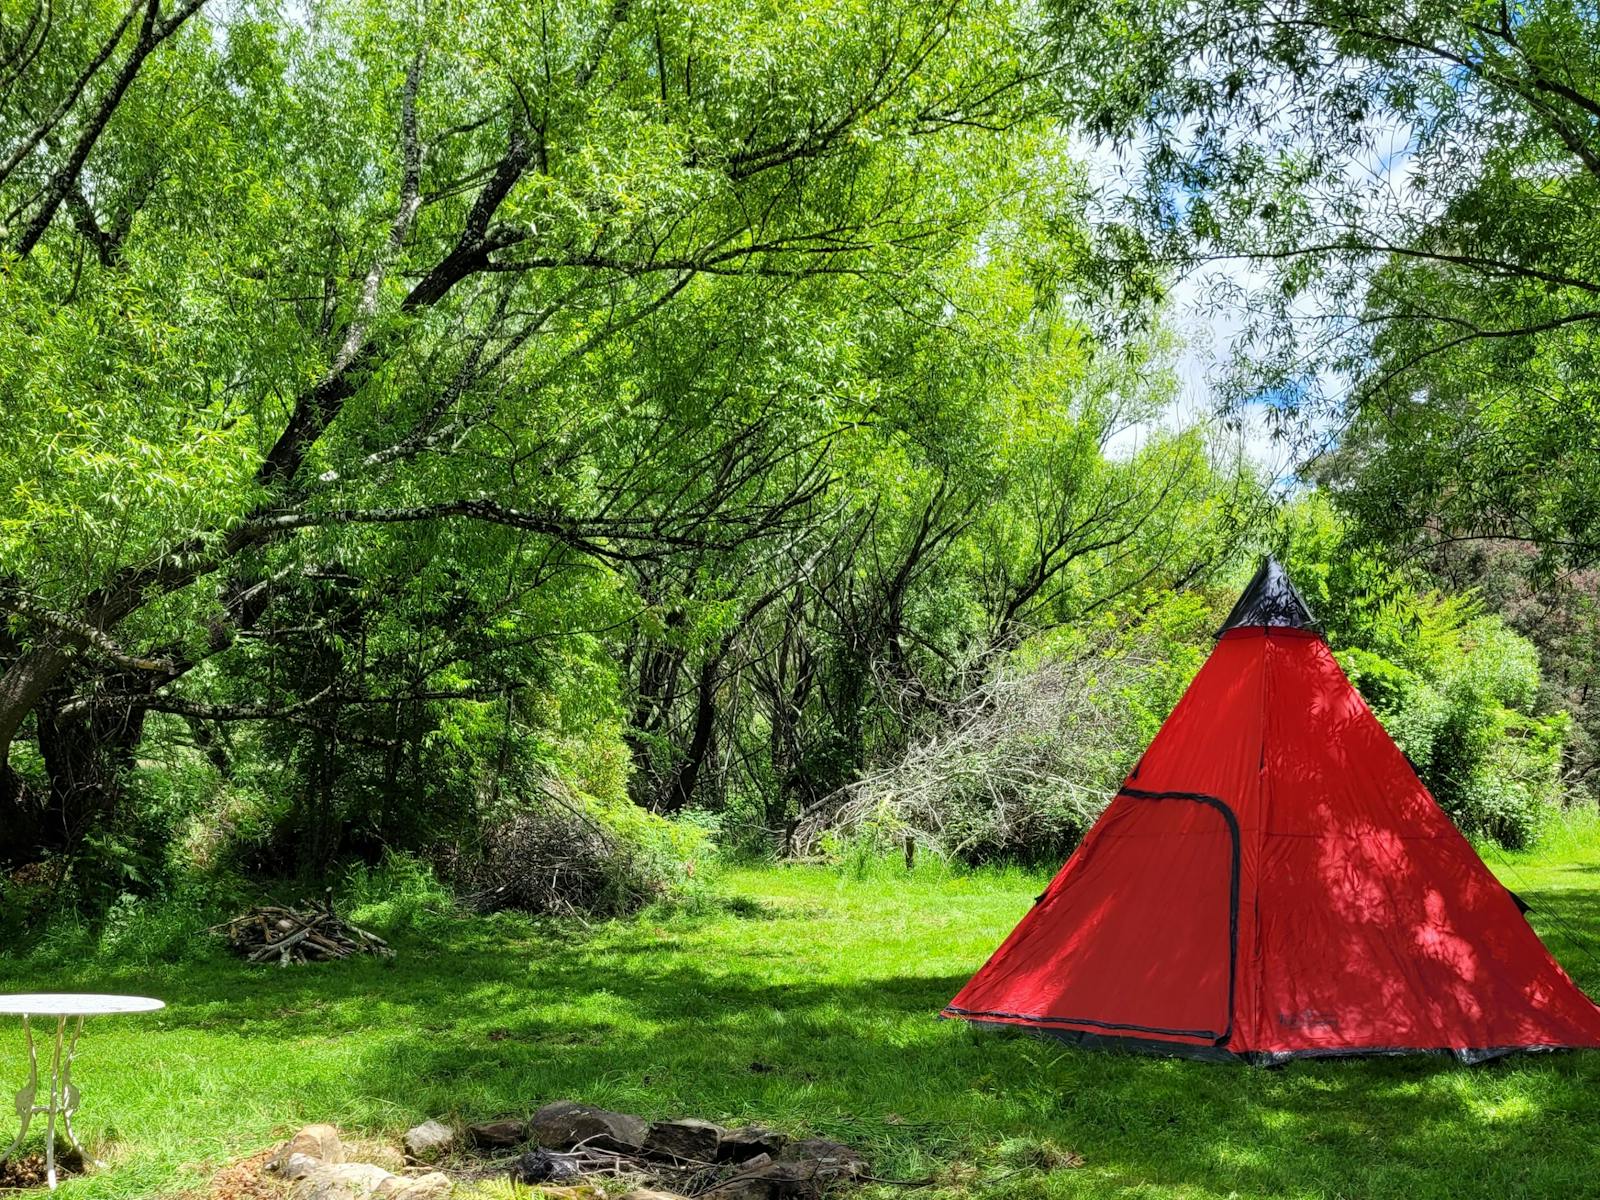 Small Campsite with Teepee Shaped Tent set up